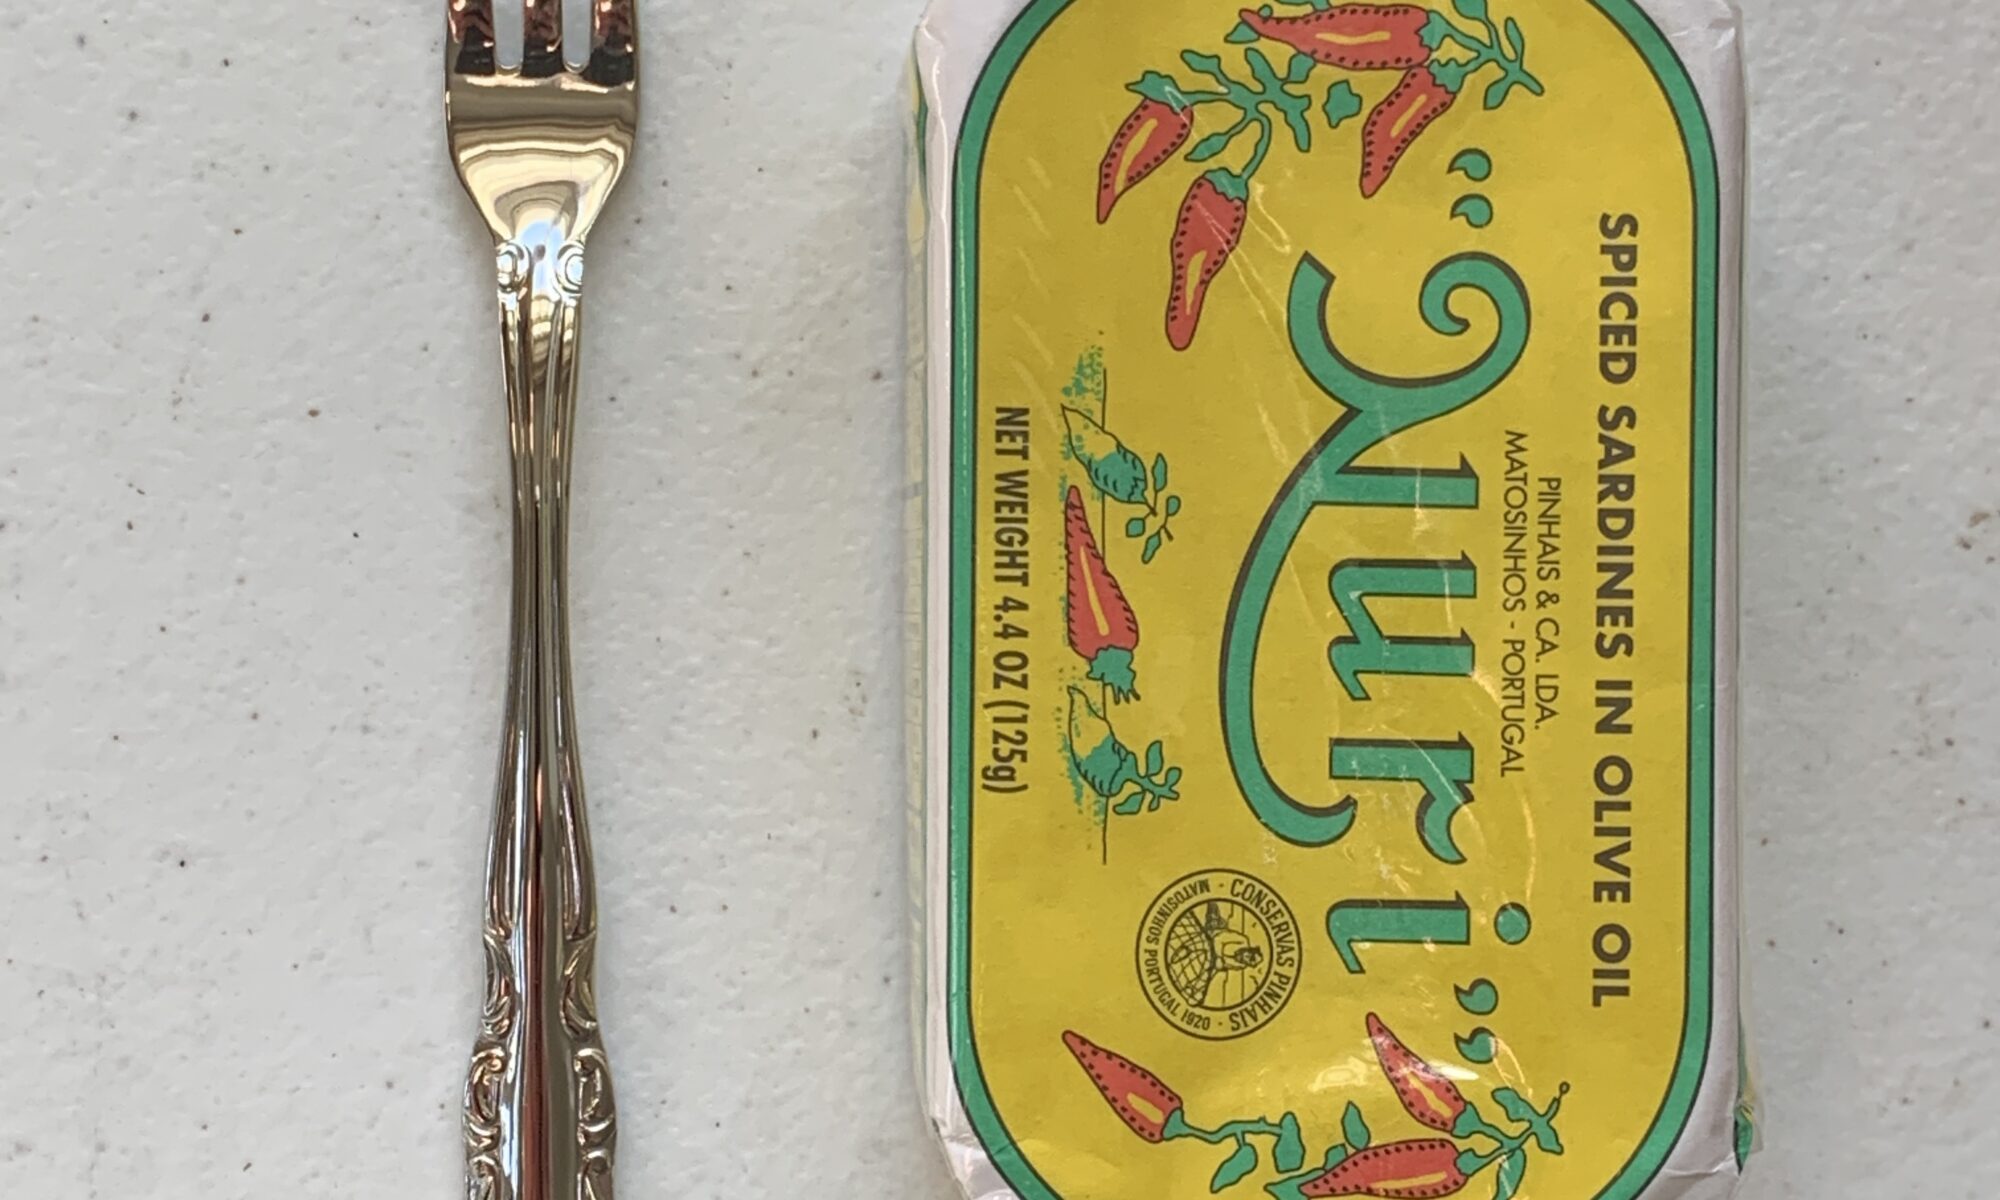 Image of a Cocktail Fork, Walco Discretion, Stainless Steel, Heavy Weight next to a tin of sardines for scale